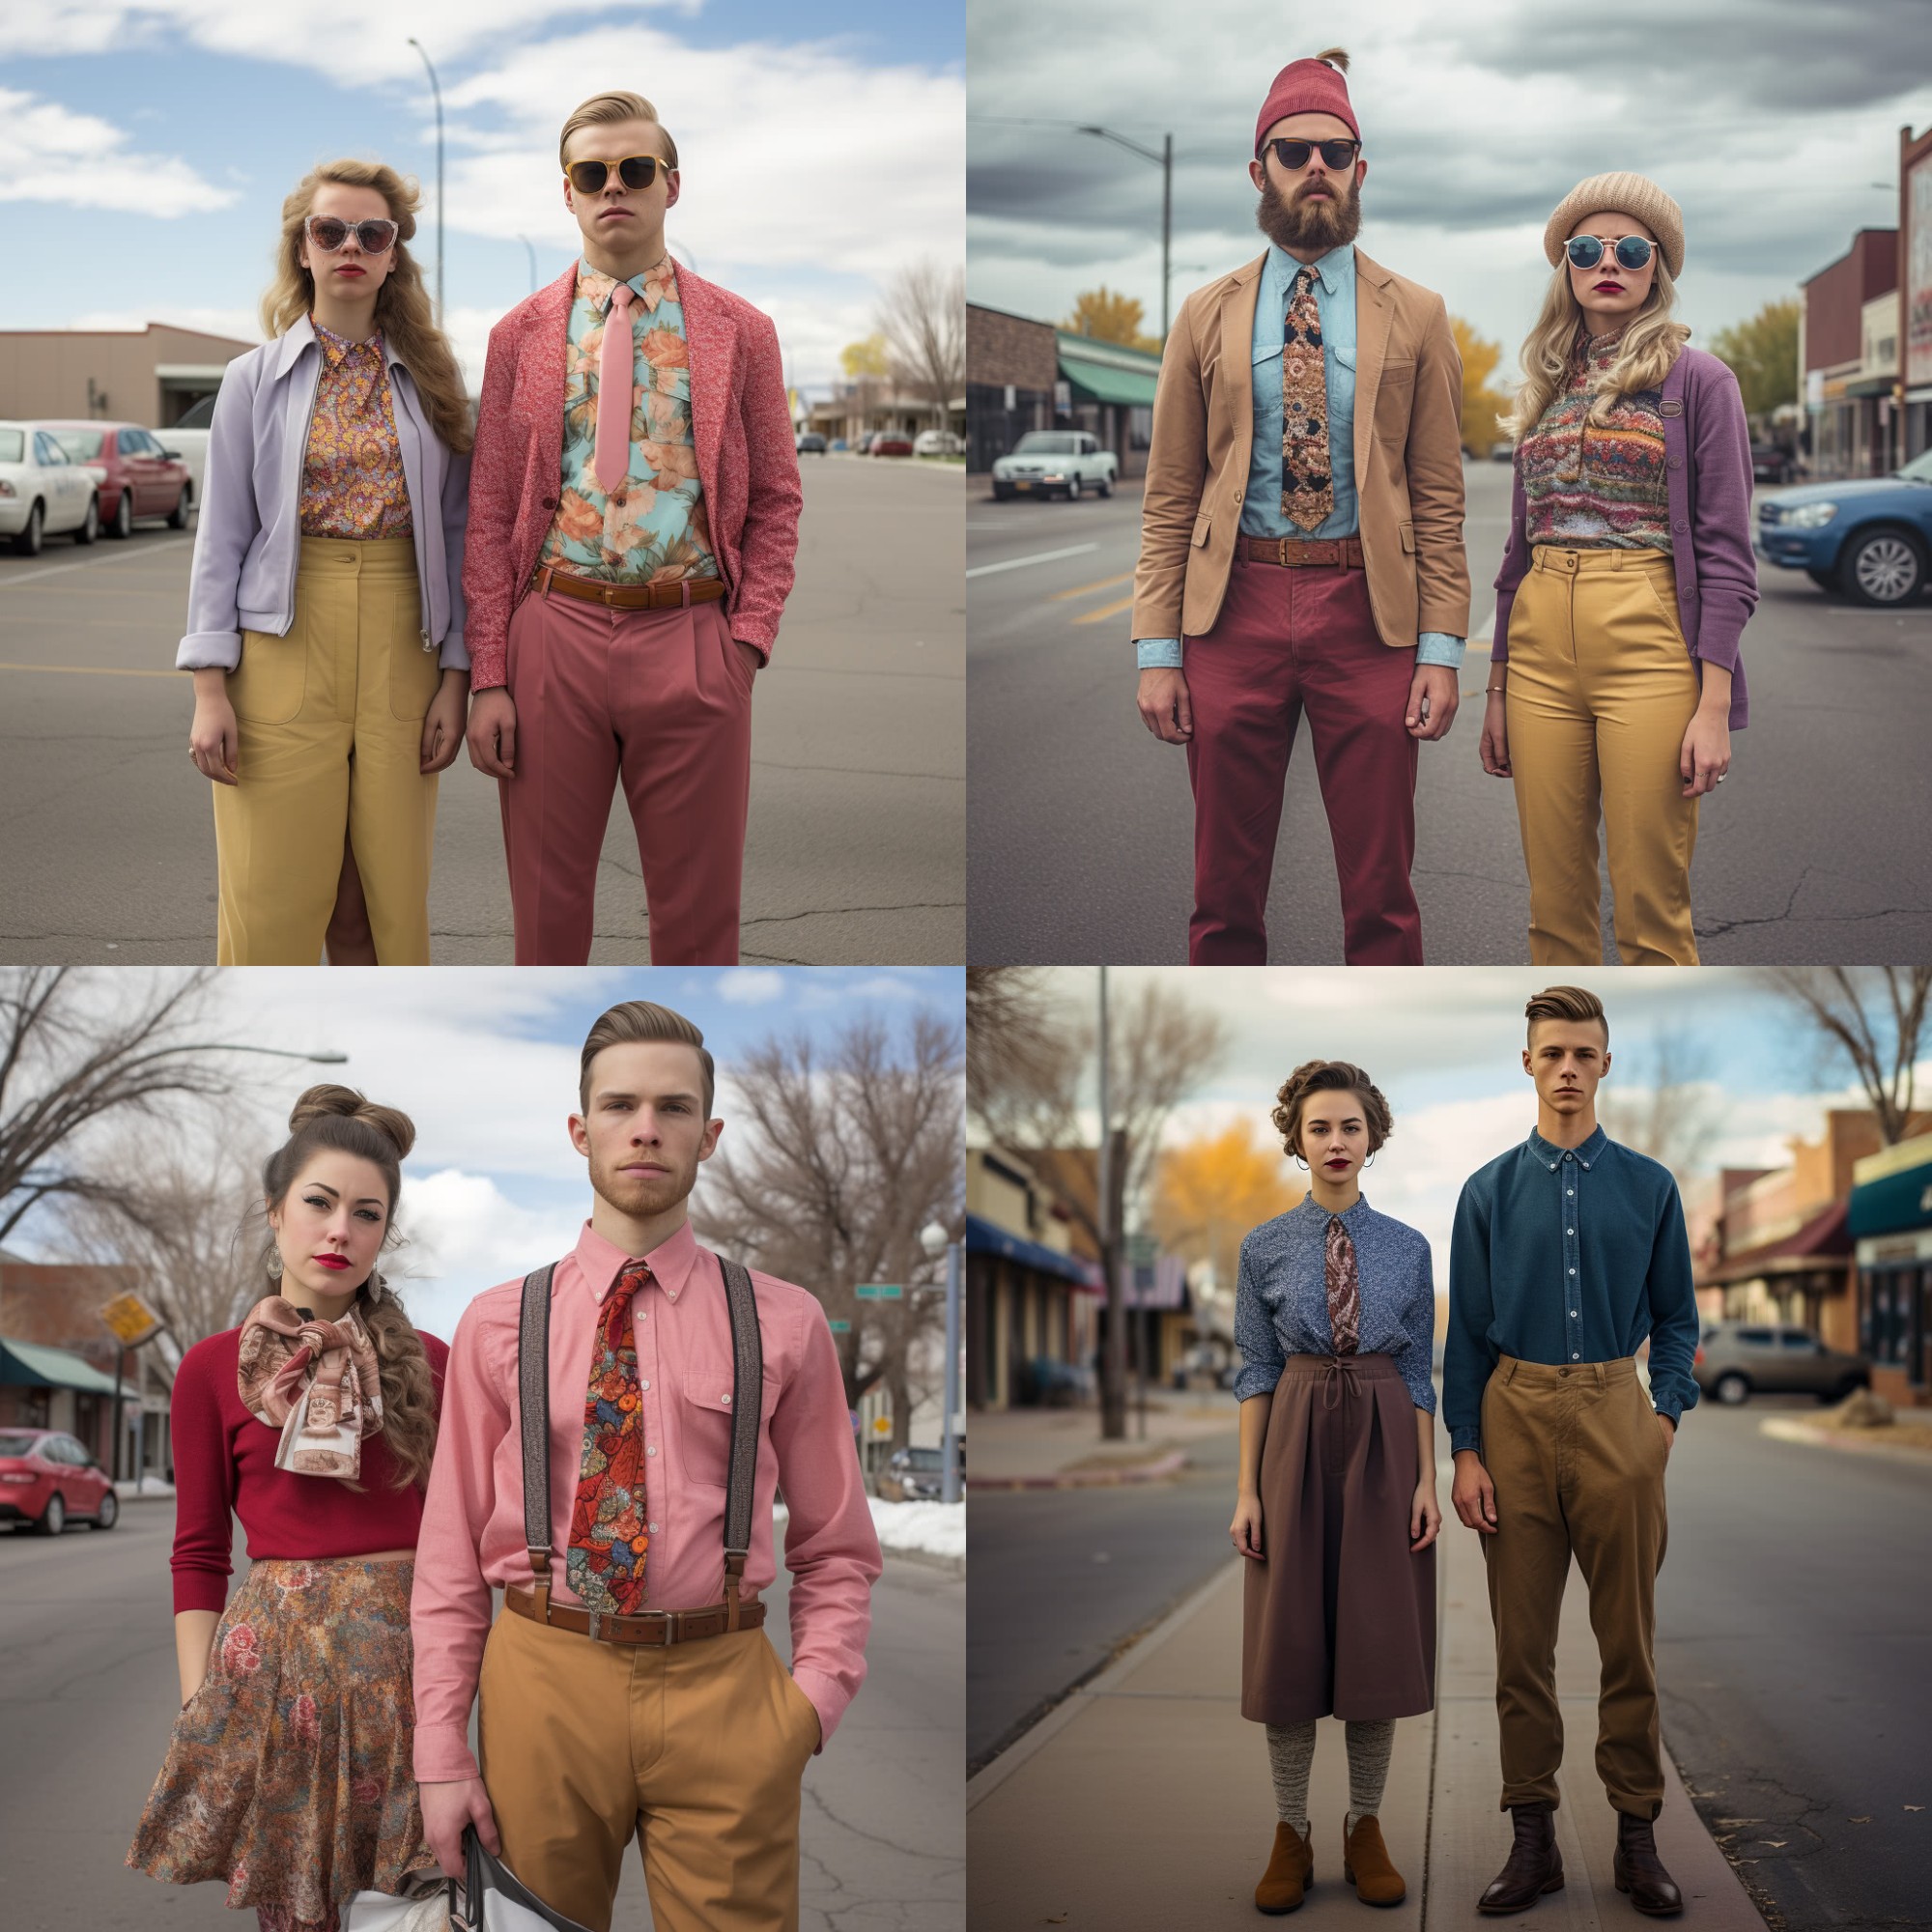 AI curated images of the average fashion style of individuals in Utah